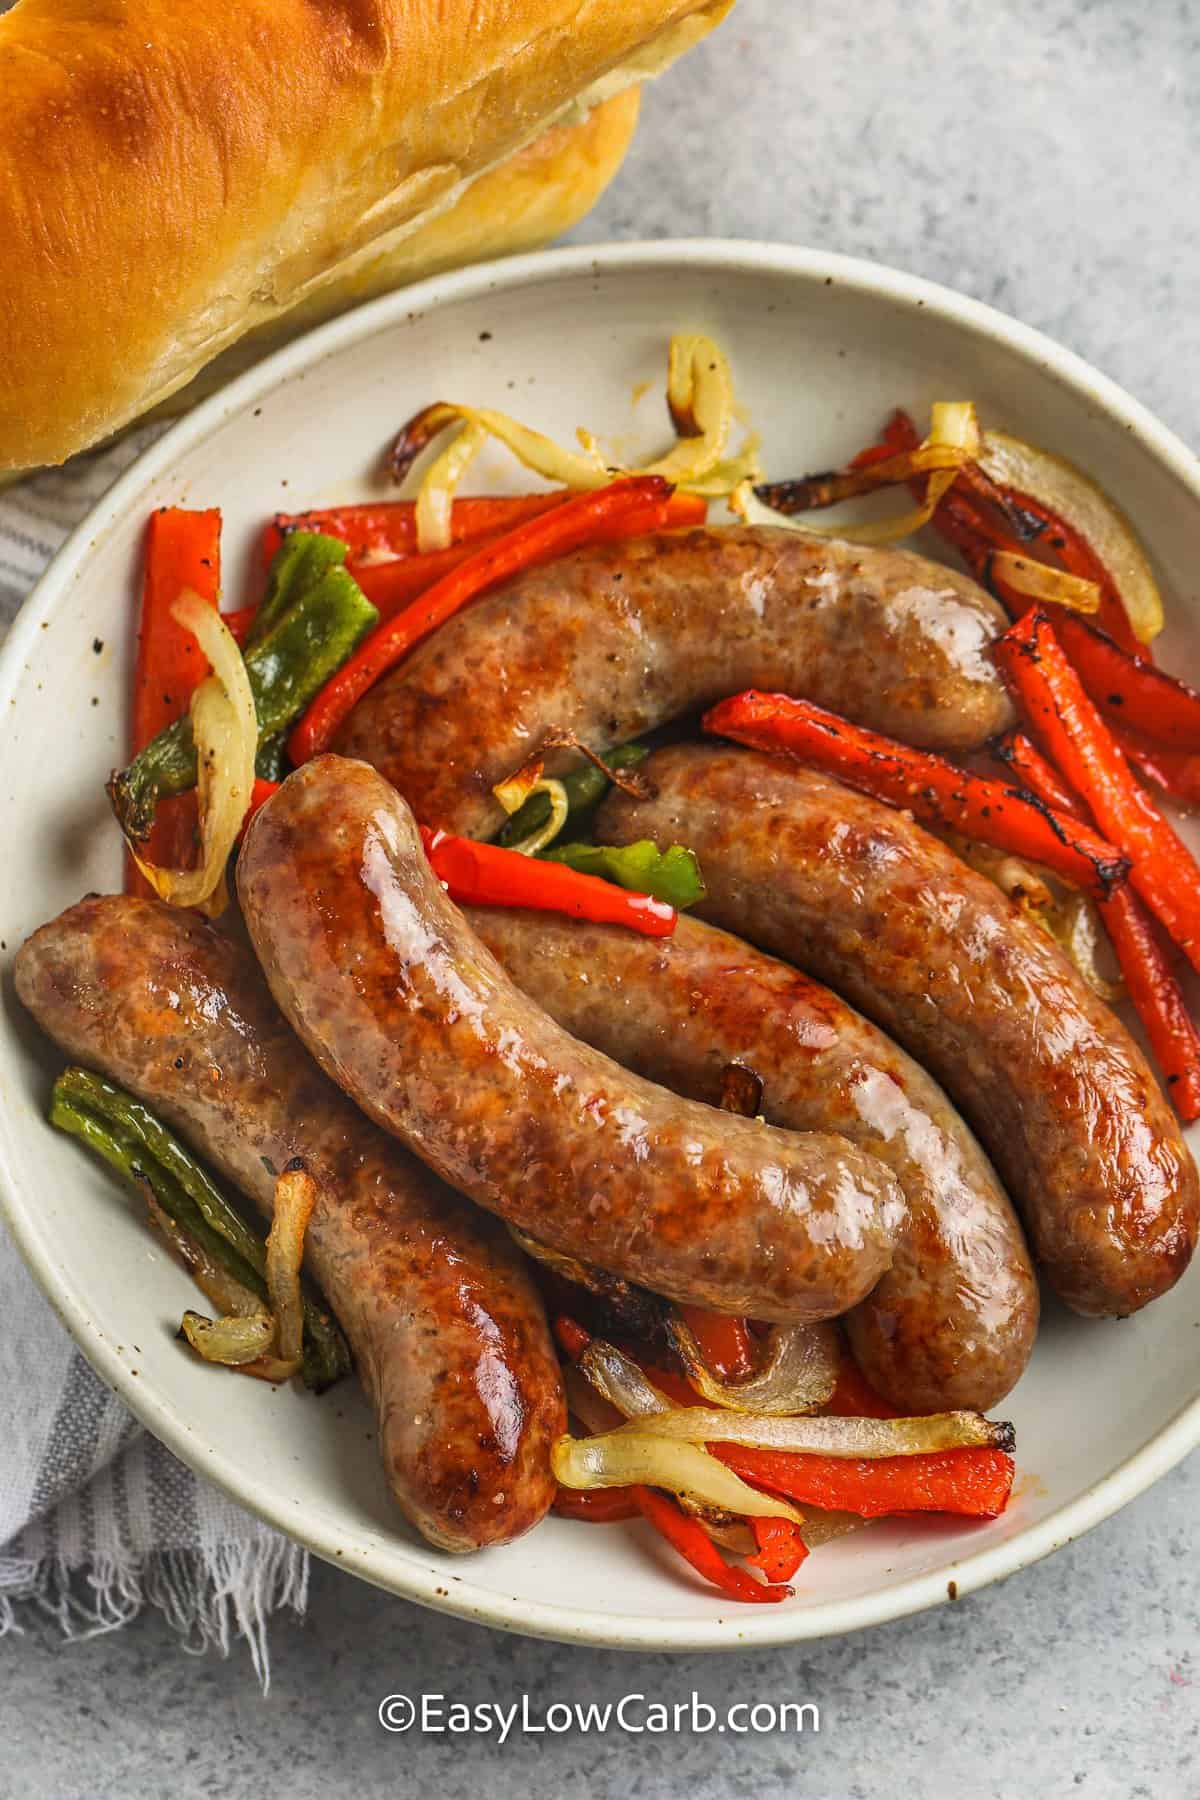 https://easylowcarb.com/wp-content/uploads/2022/08/Air-Fryer-Brats-with-Peppers-and-Onions-EasyLowCarb4.jpg